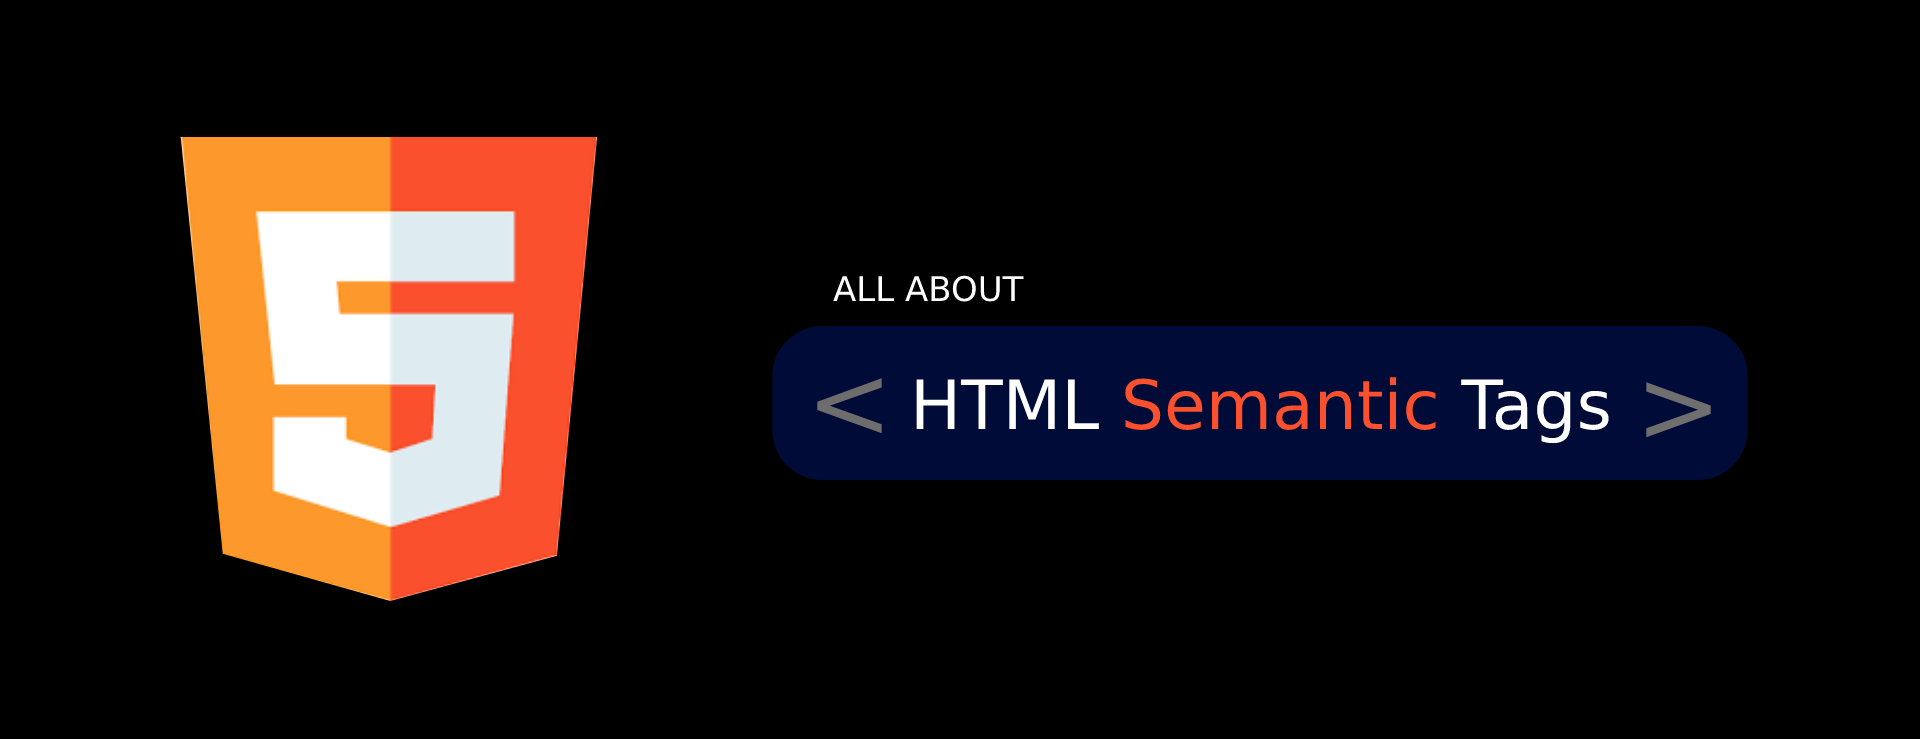 All About HTML Semantic Tags